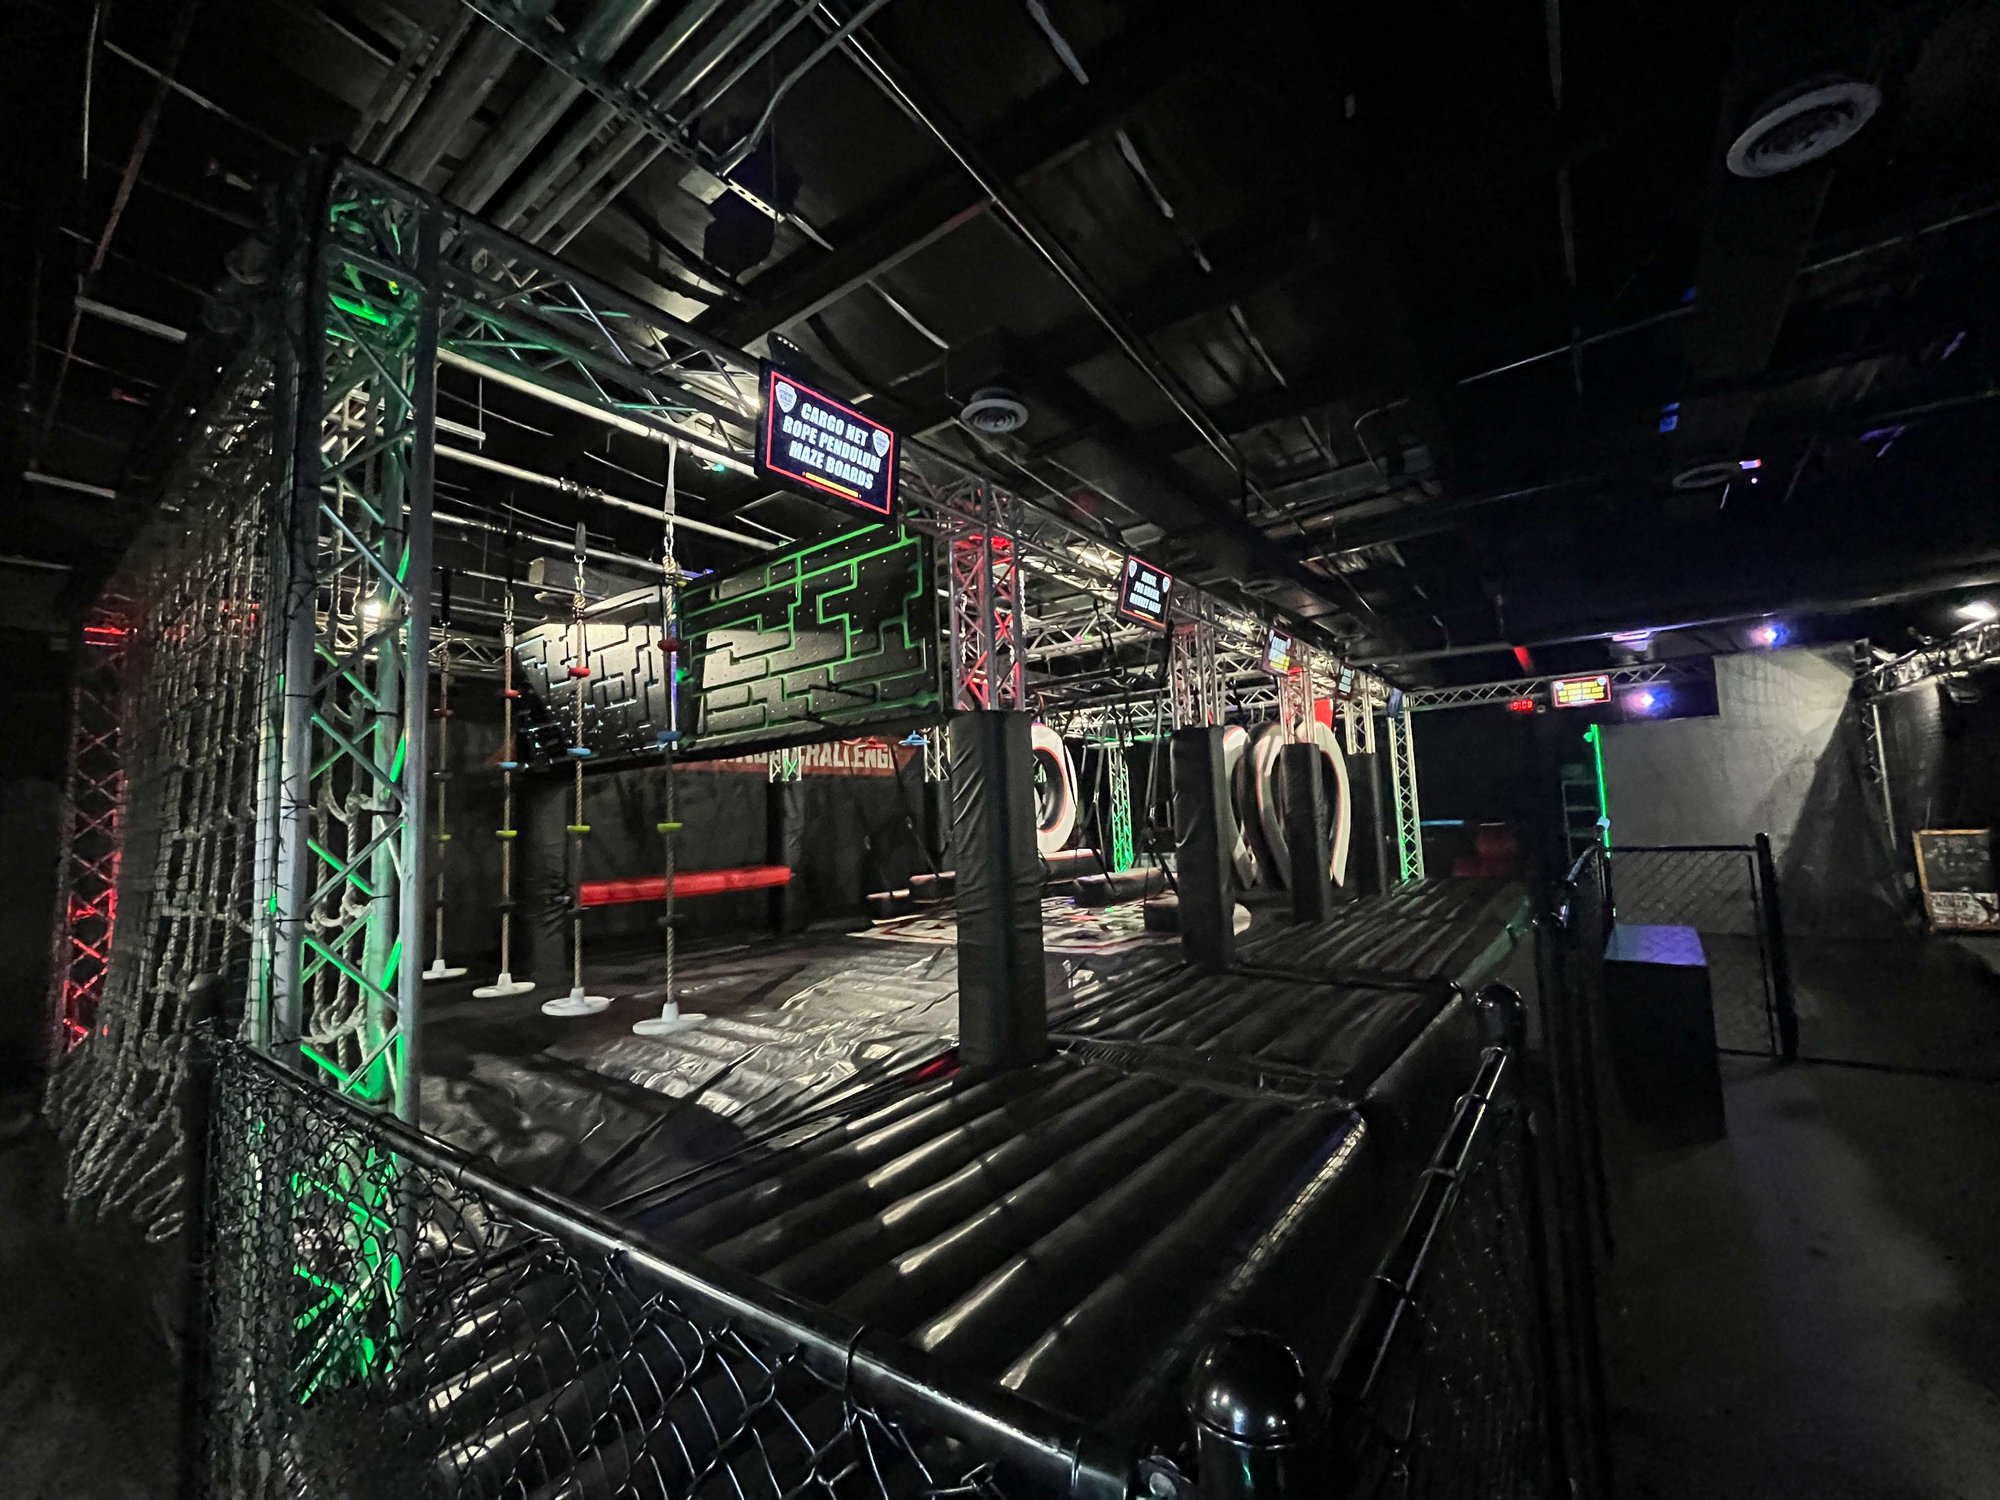 dark room with metal bars and obstacles for climbing